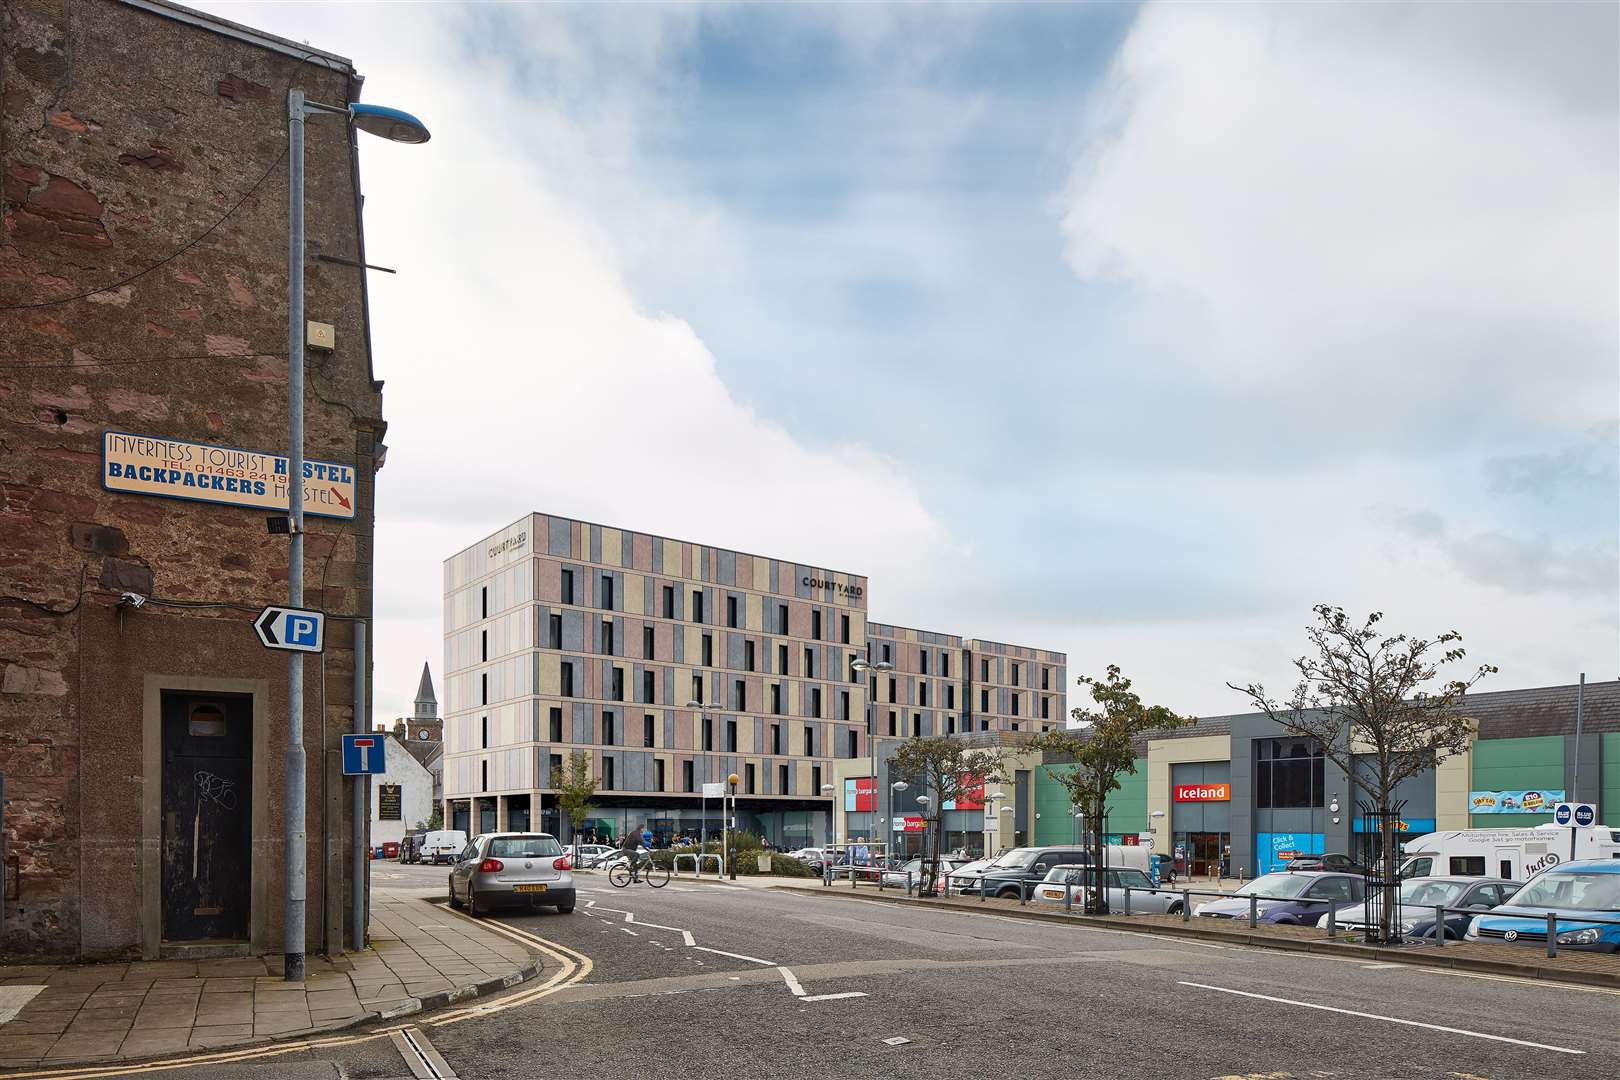 Previous proposals for the hotel were rejected by councillors in December.